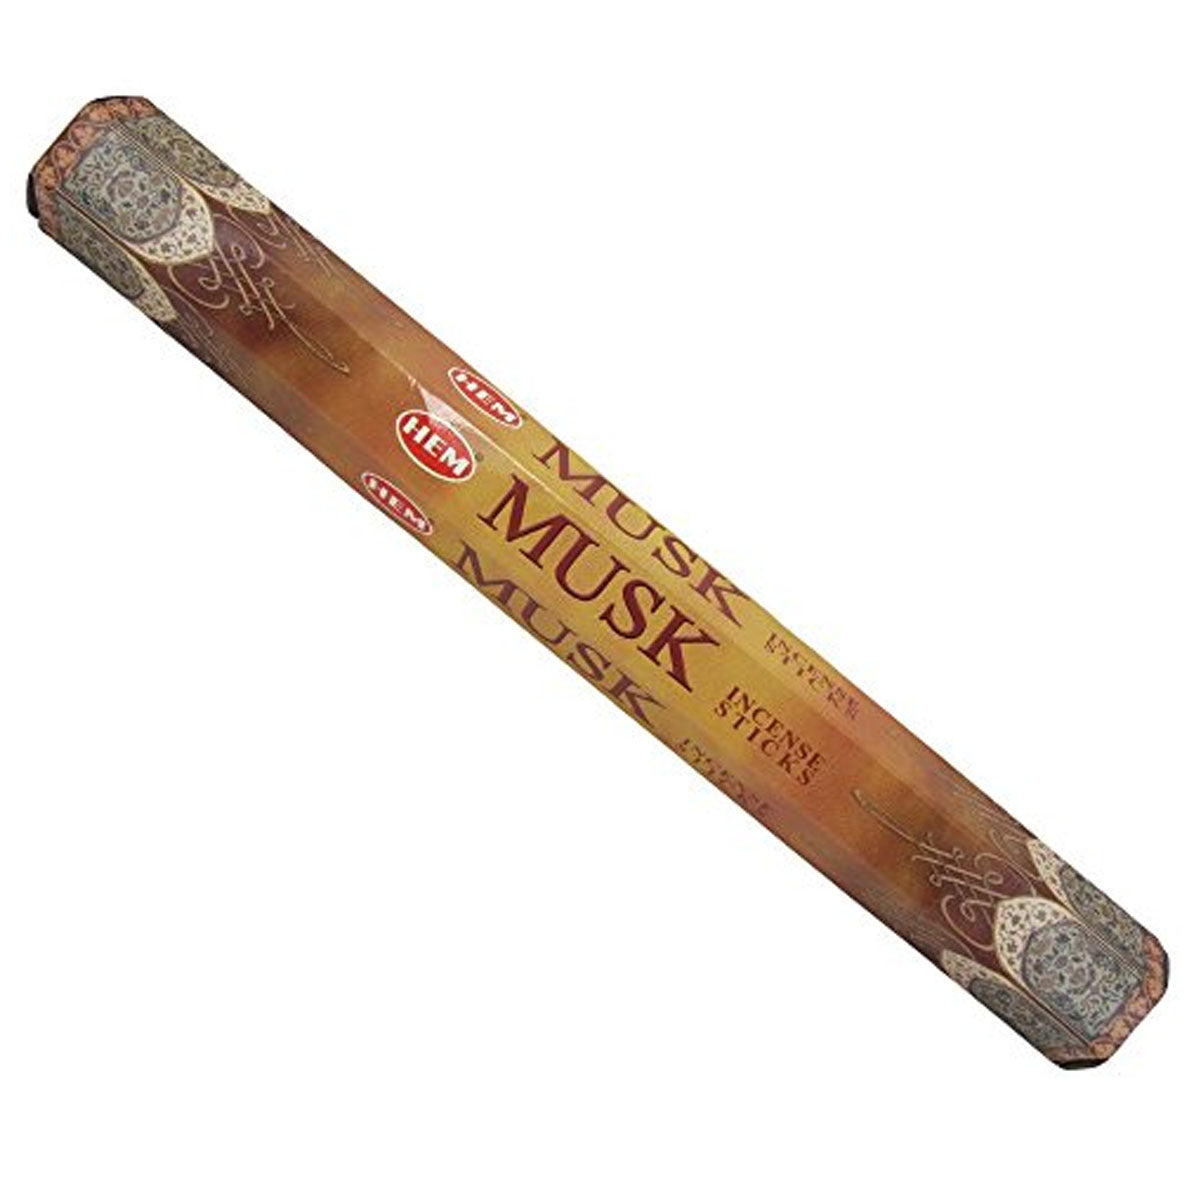 A stick of HEM - Indian Traditional Incense Sticks - 20pcs with the words musk on it.